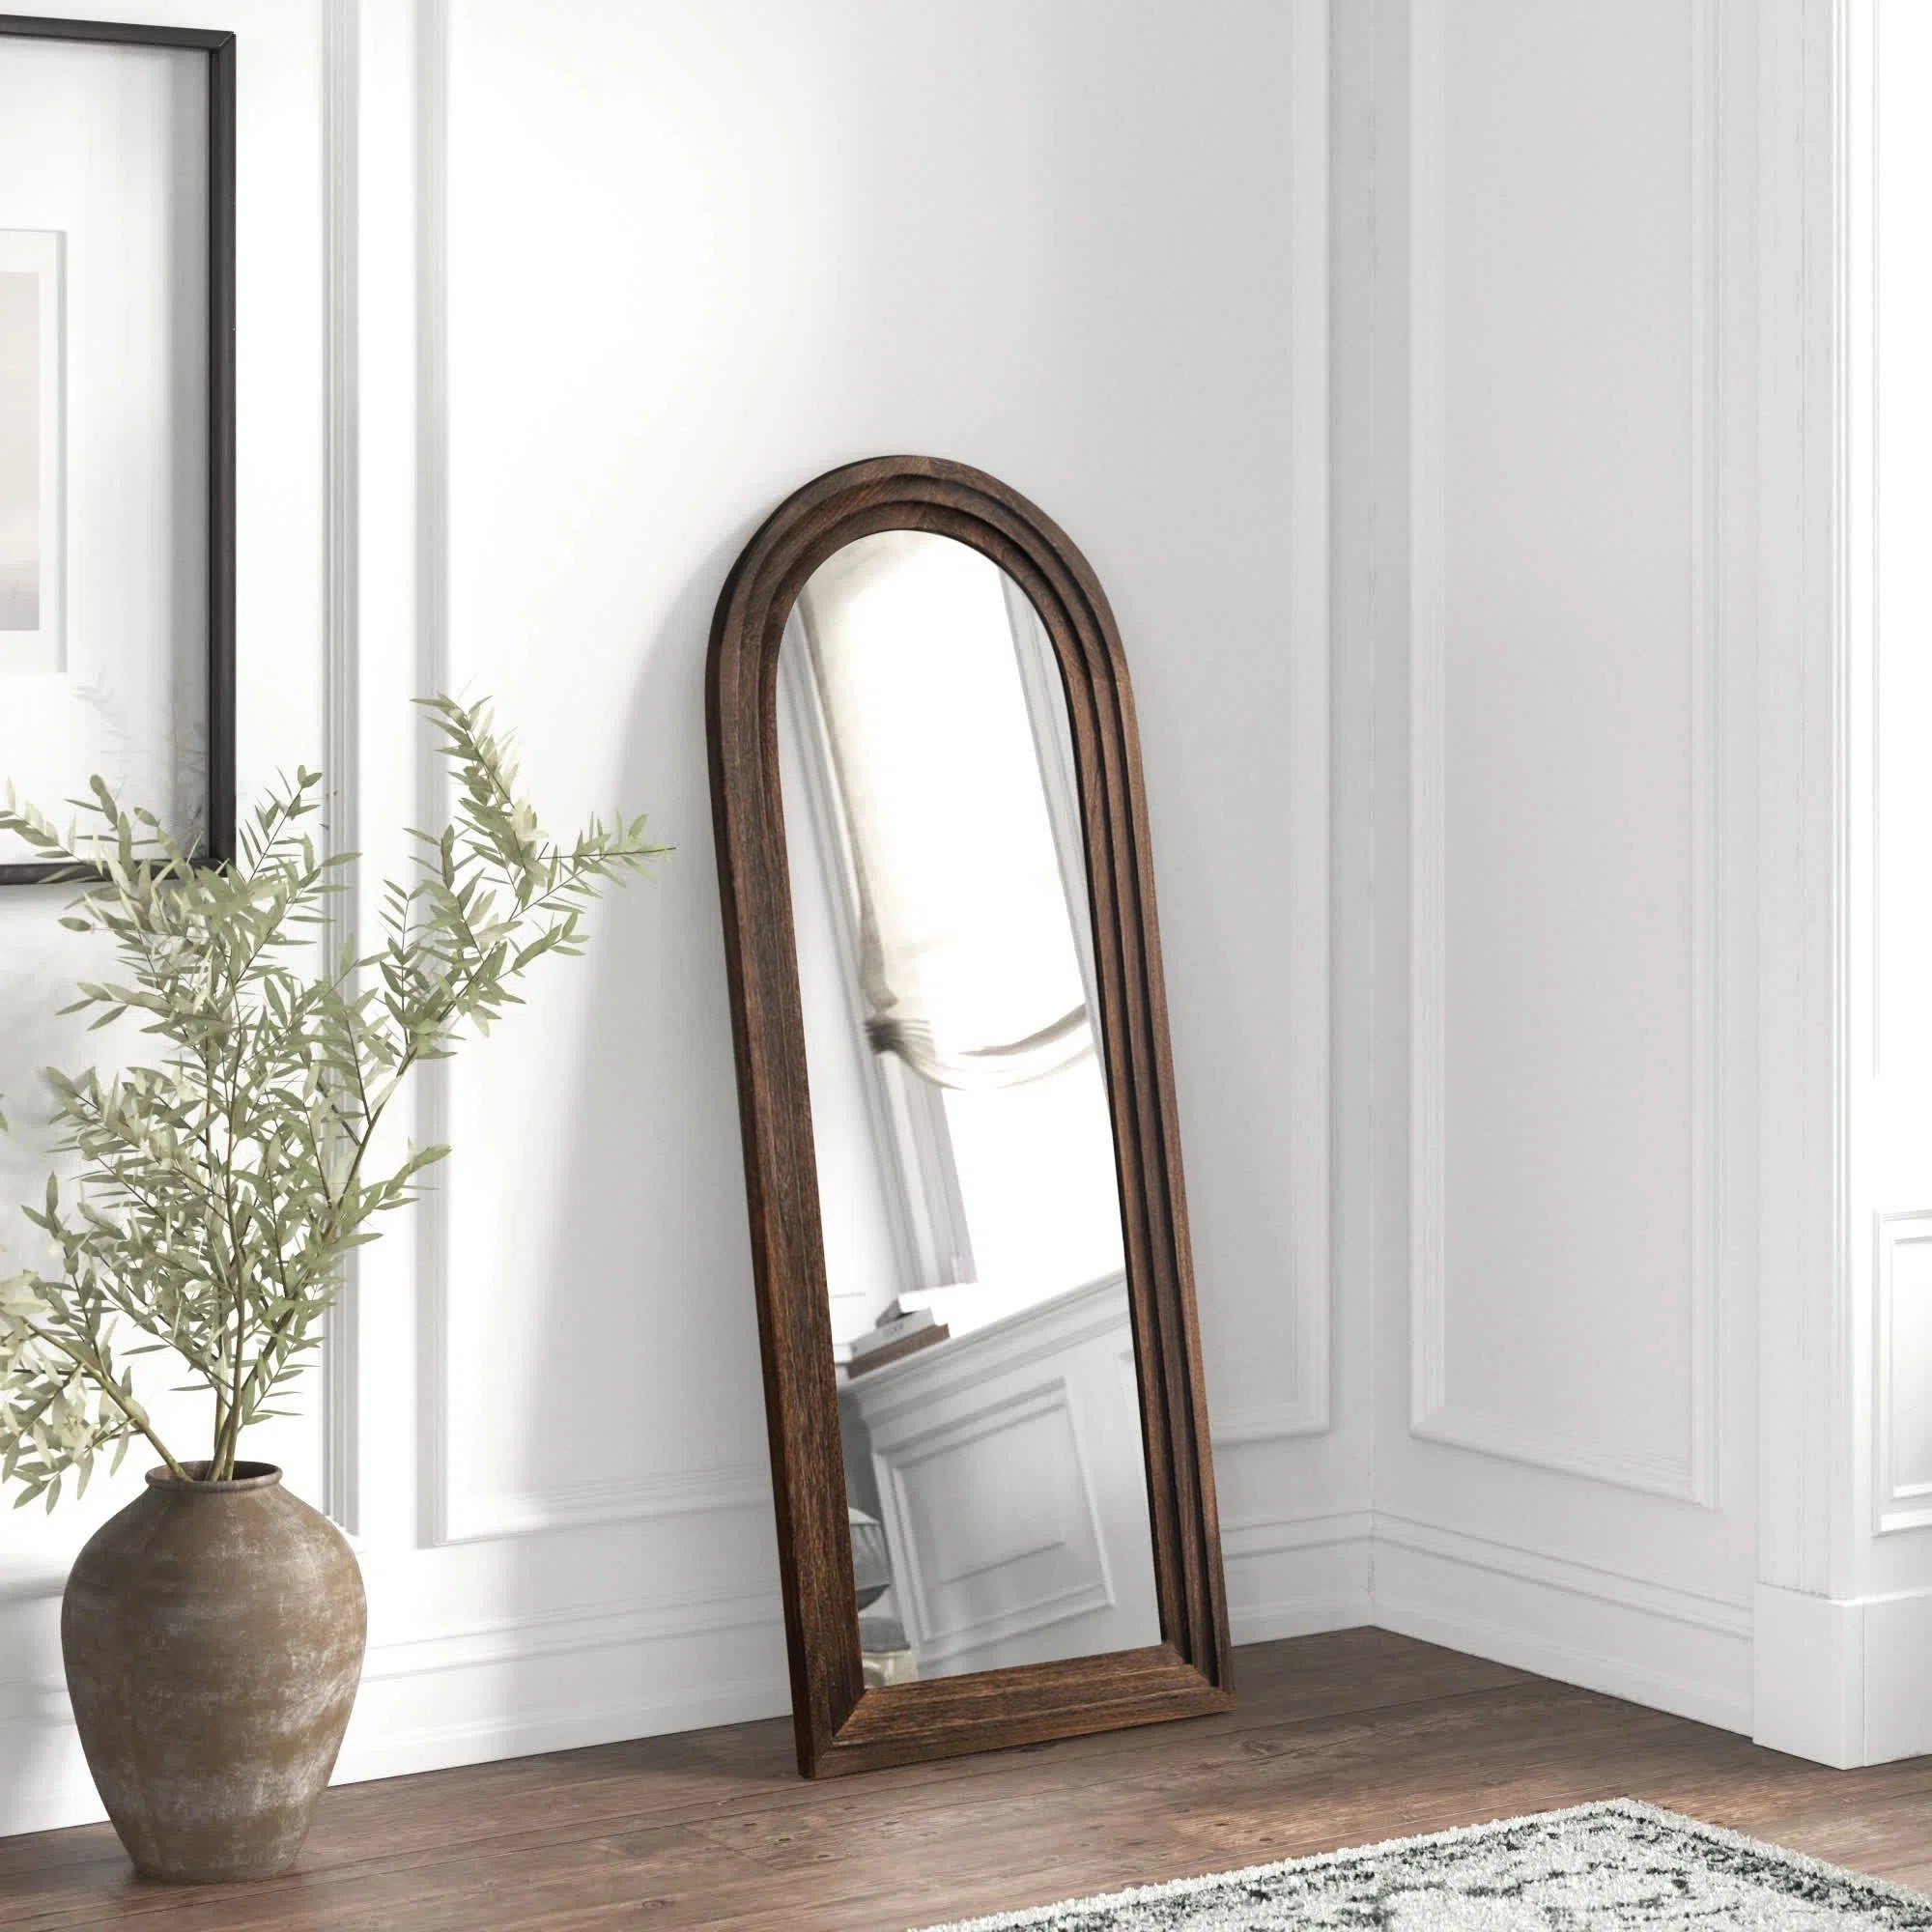 The arched mirror hanging against a wall